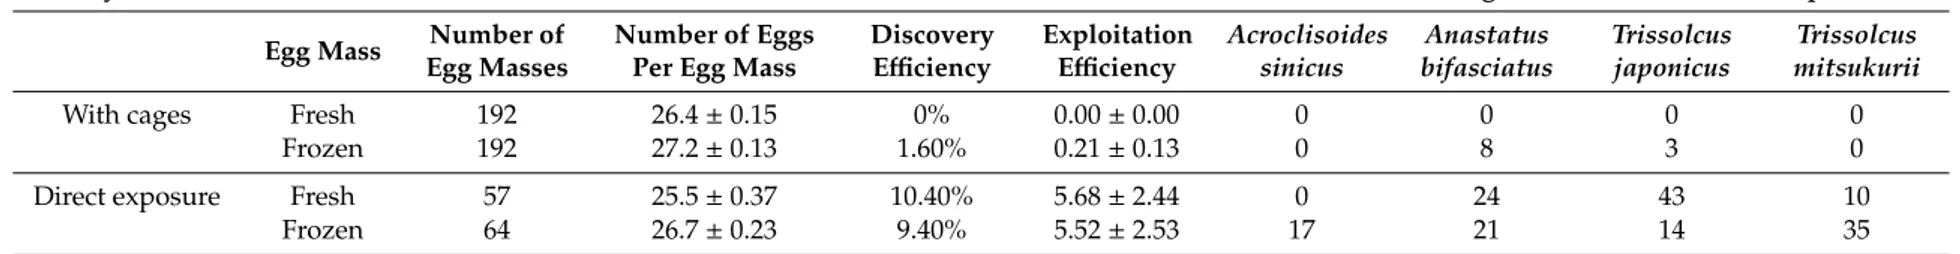 Table 3. Number of egg masses and mean number of eggs per egg mass used for the sentinel egg mass survey (with cages and direct exposure), showing the discovery efficiency for each approach, the exploitation efficiency (values followed by the same letter w